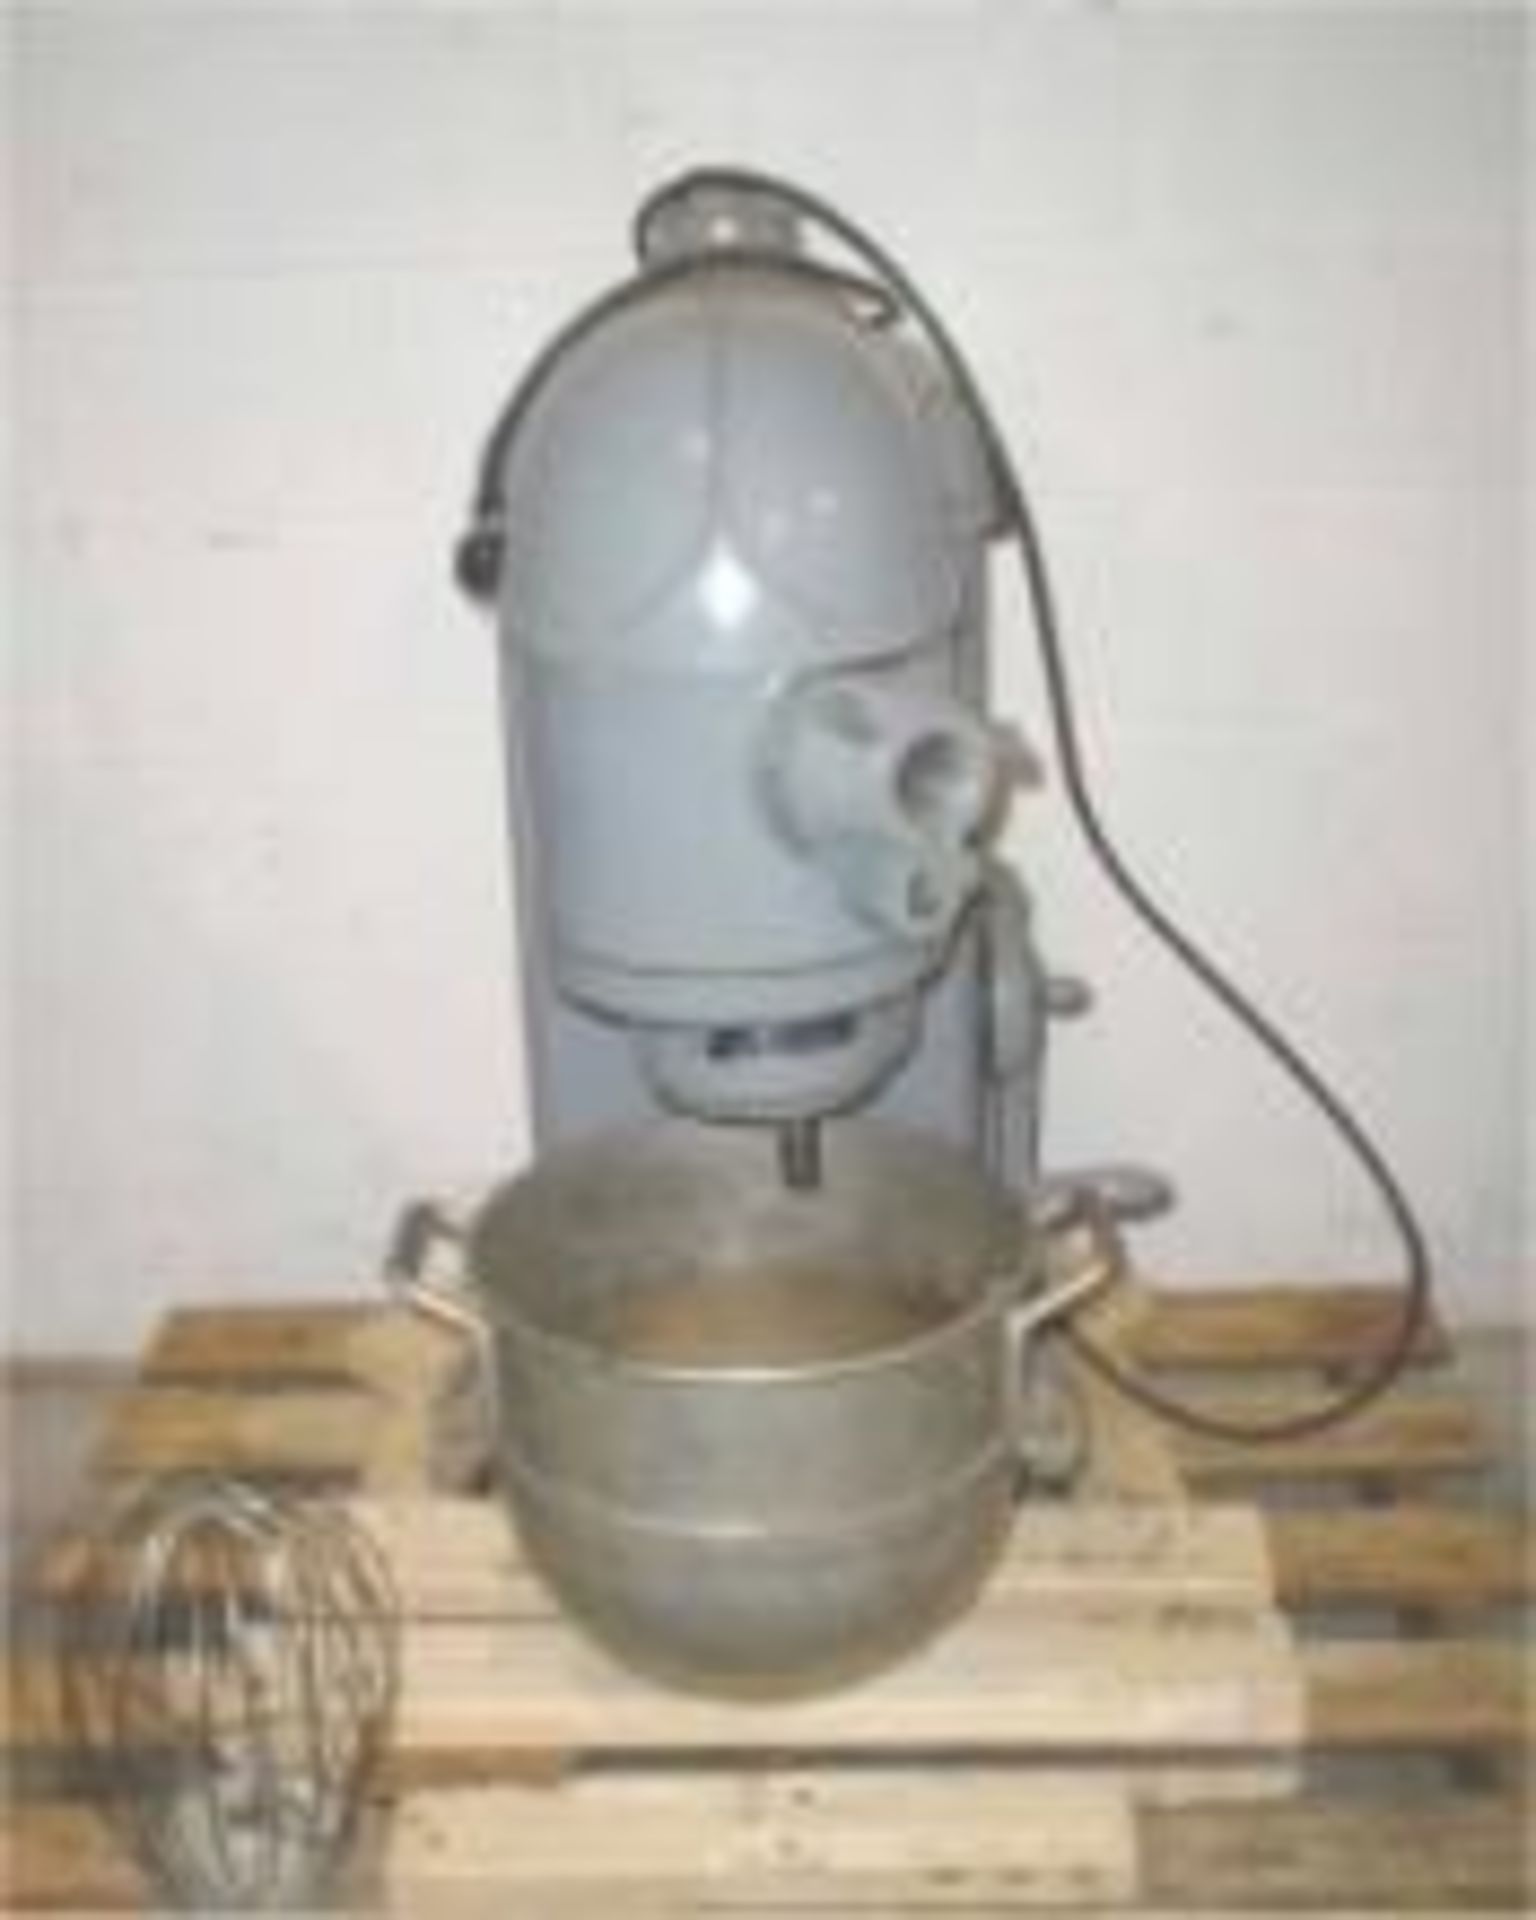 Used BlakesLee 20 Quart Planetary Mixer, Model CC-20 Load Out Fee:100